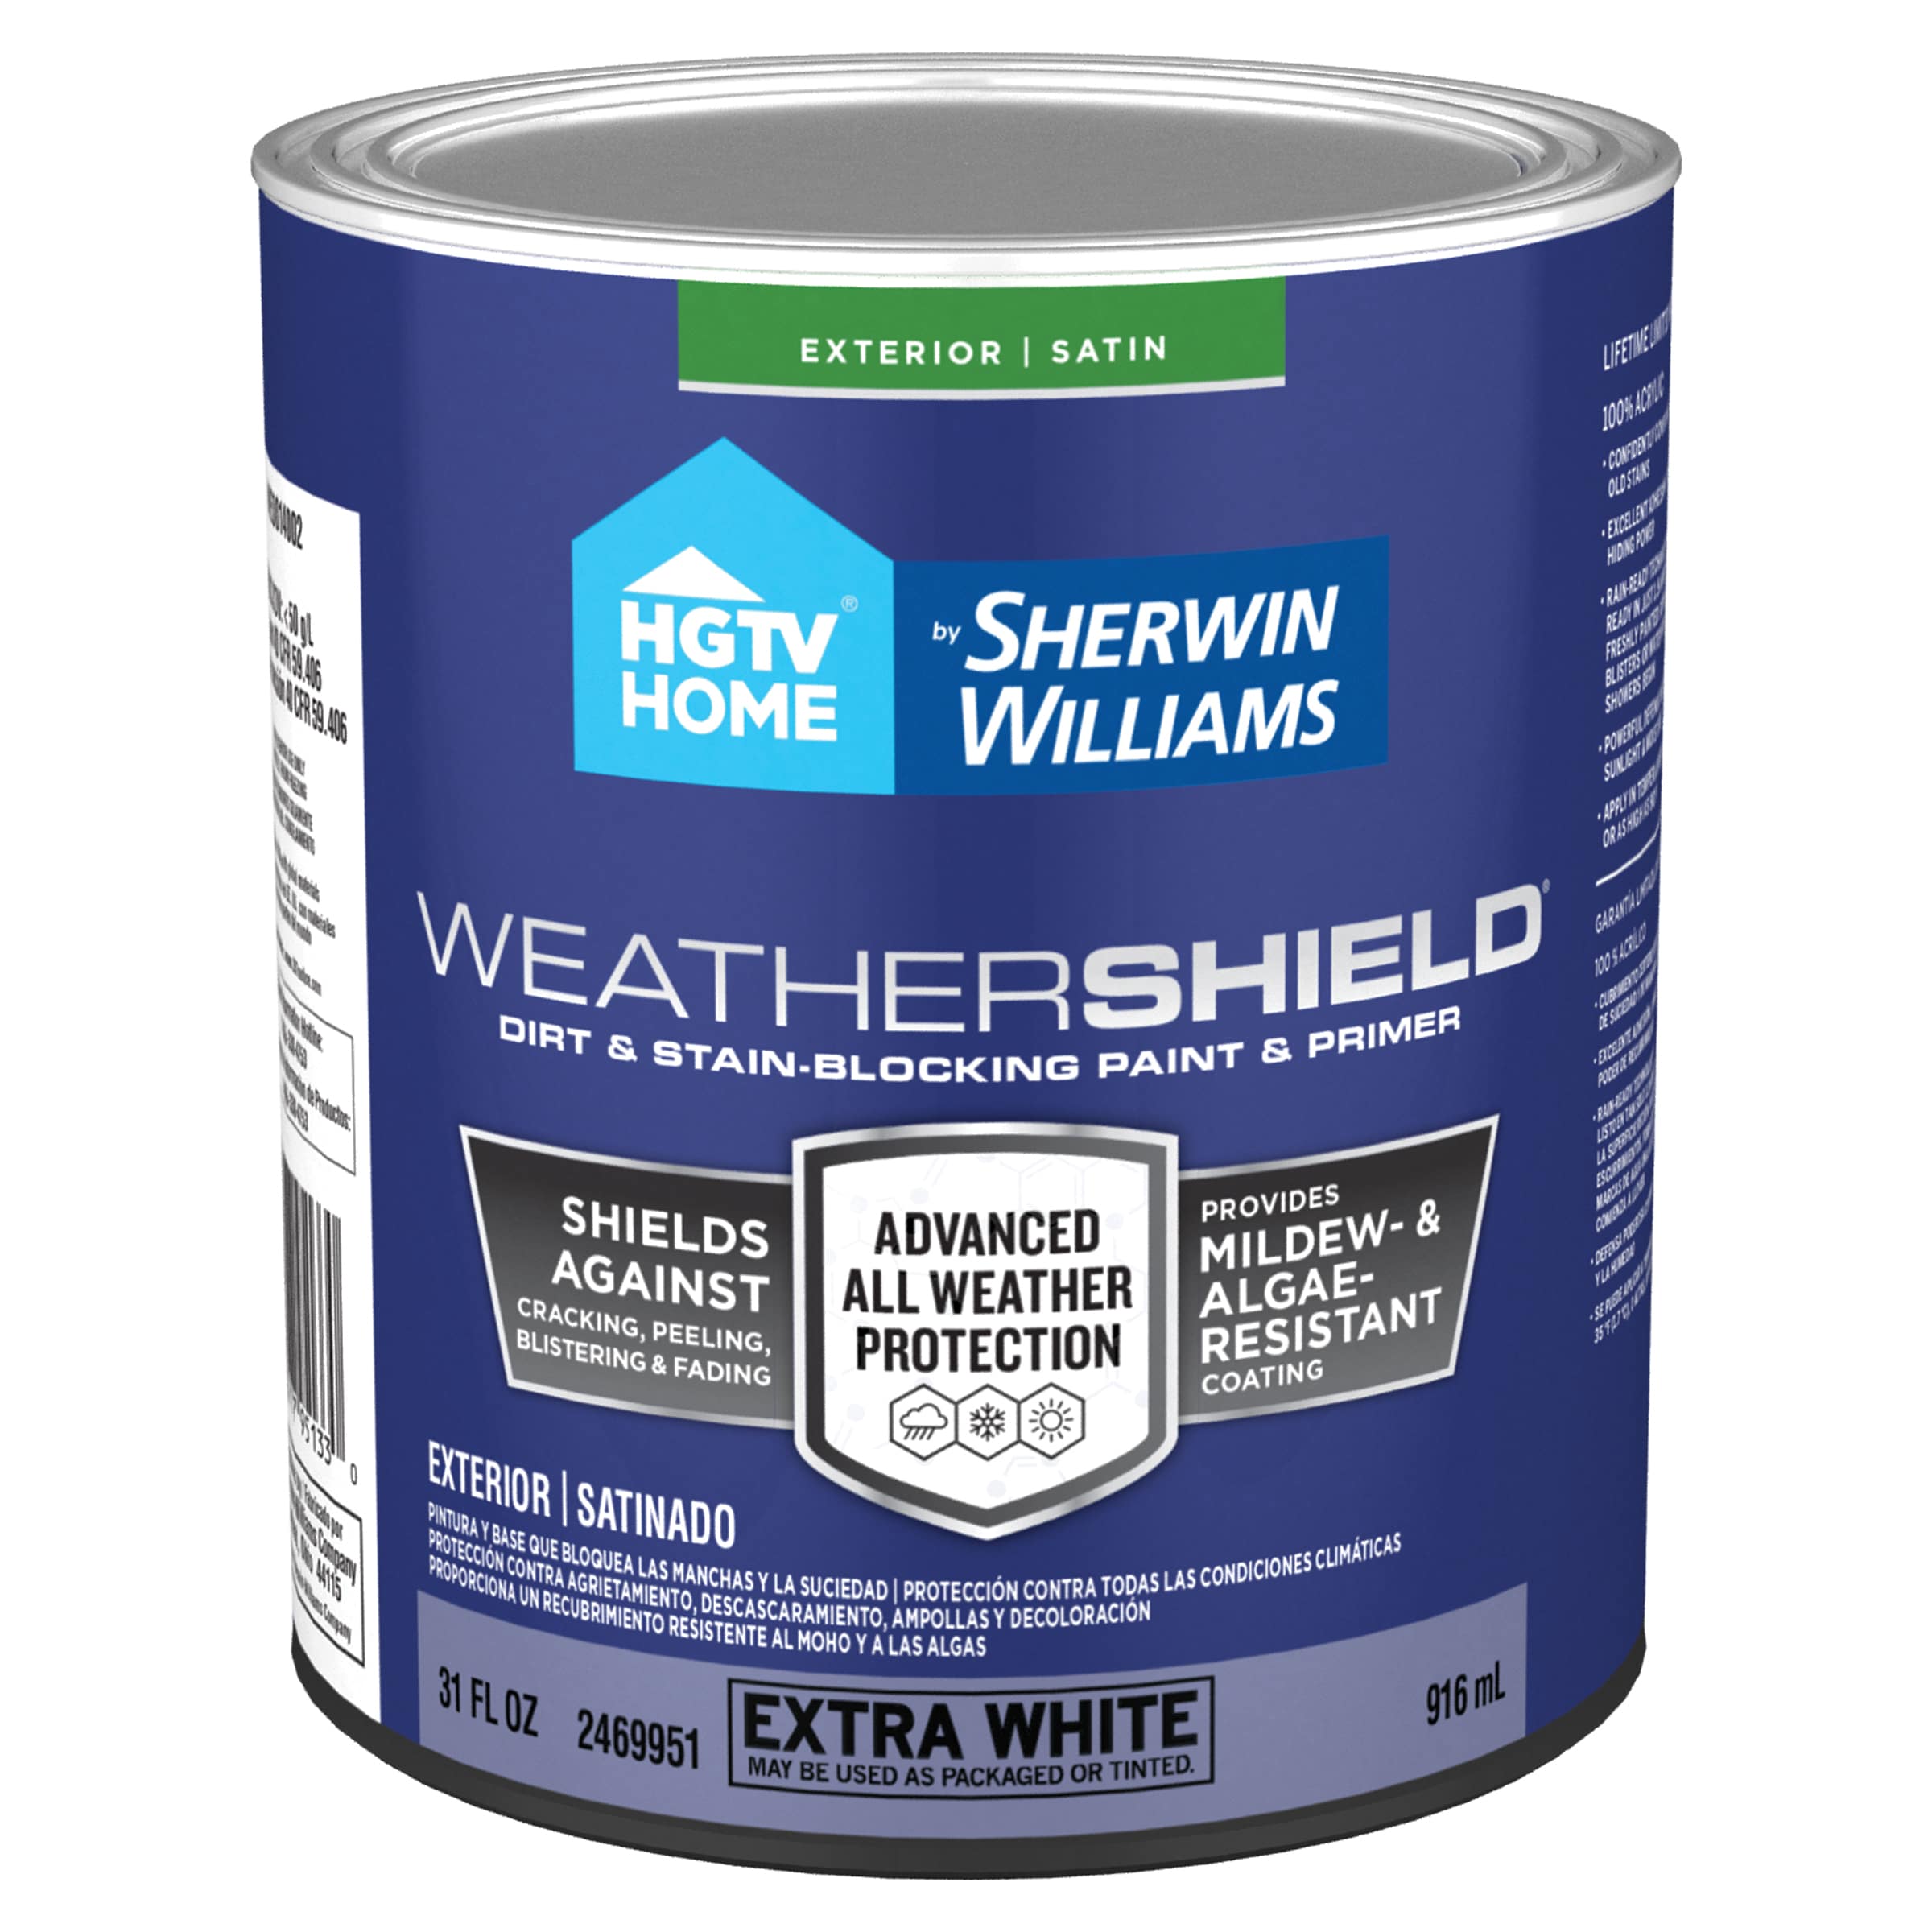 White Gloss Exterior Paint at